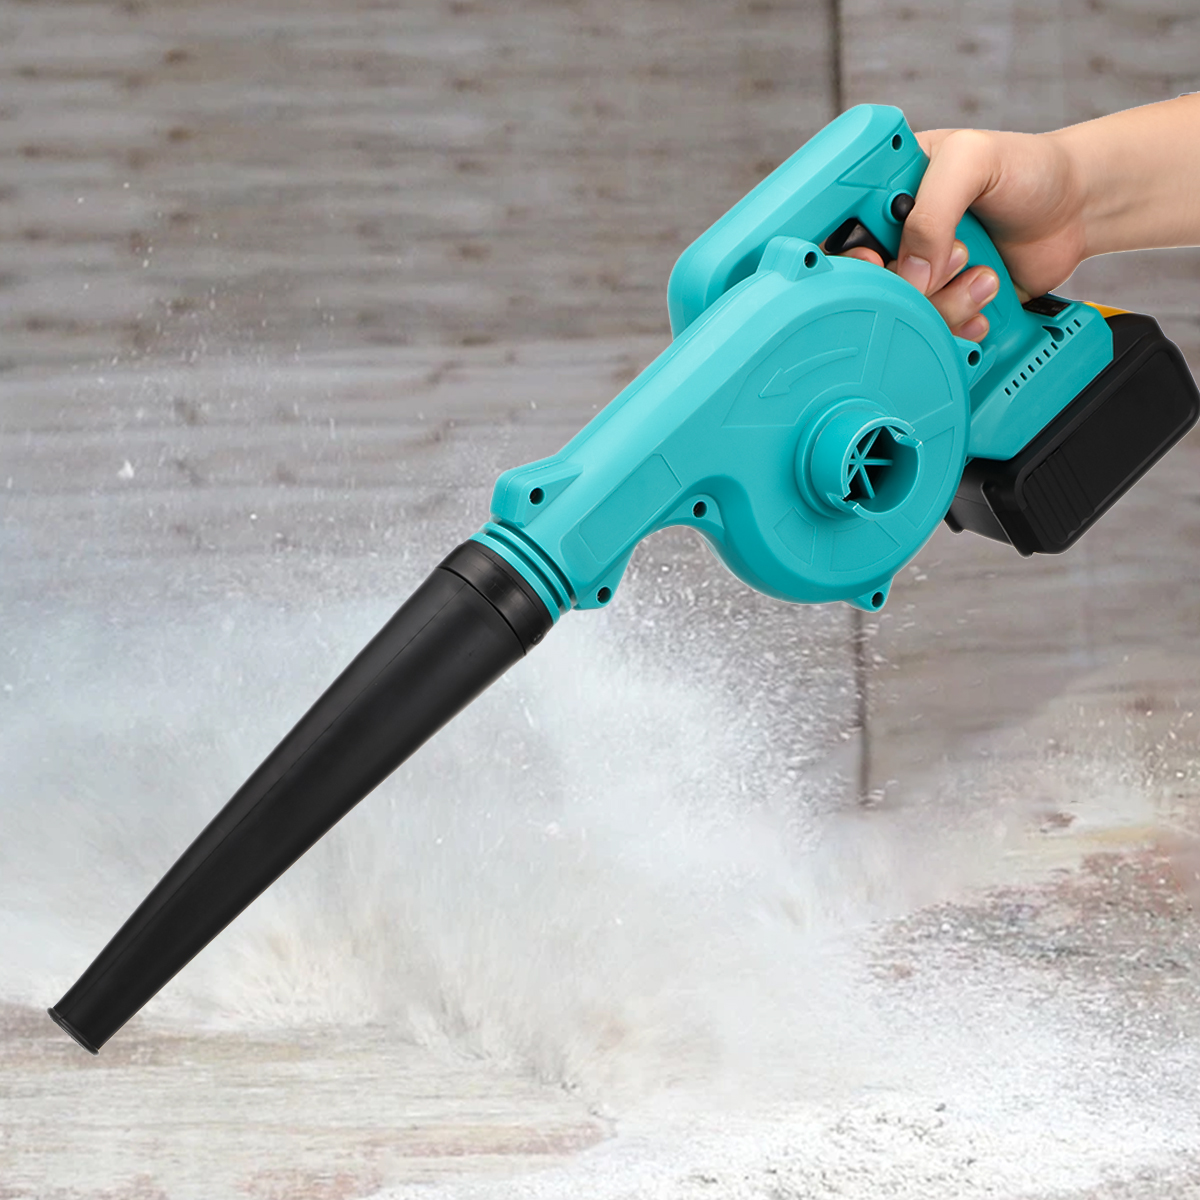 688VF-54-KPA-Brushless-Air-Blower-Suction-Cleaner-Power-Indicator-Cordless-Electric-Air-Blower--Suct-1855376-3